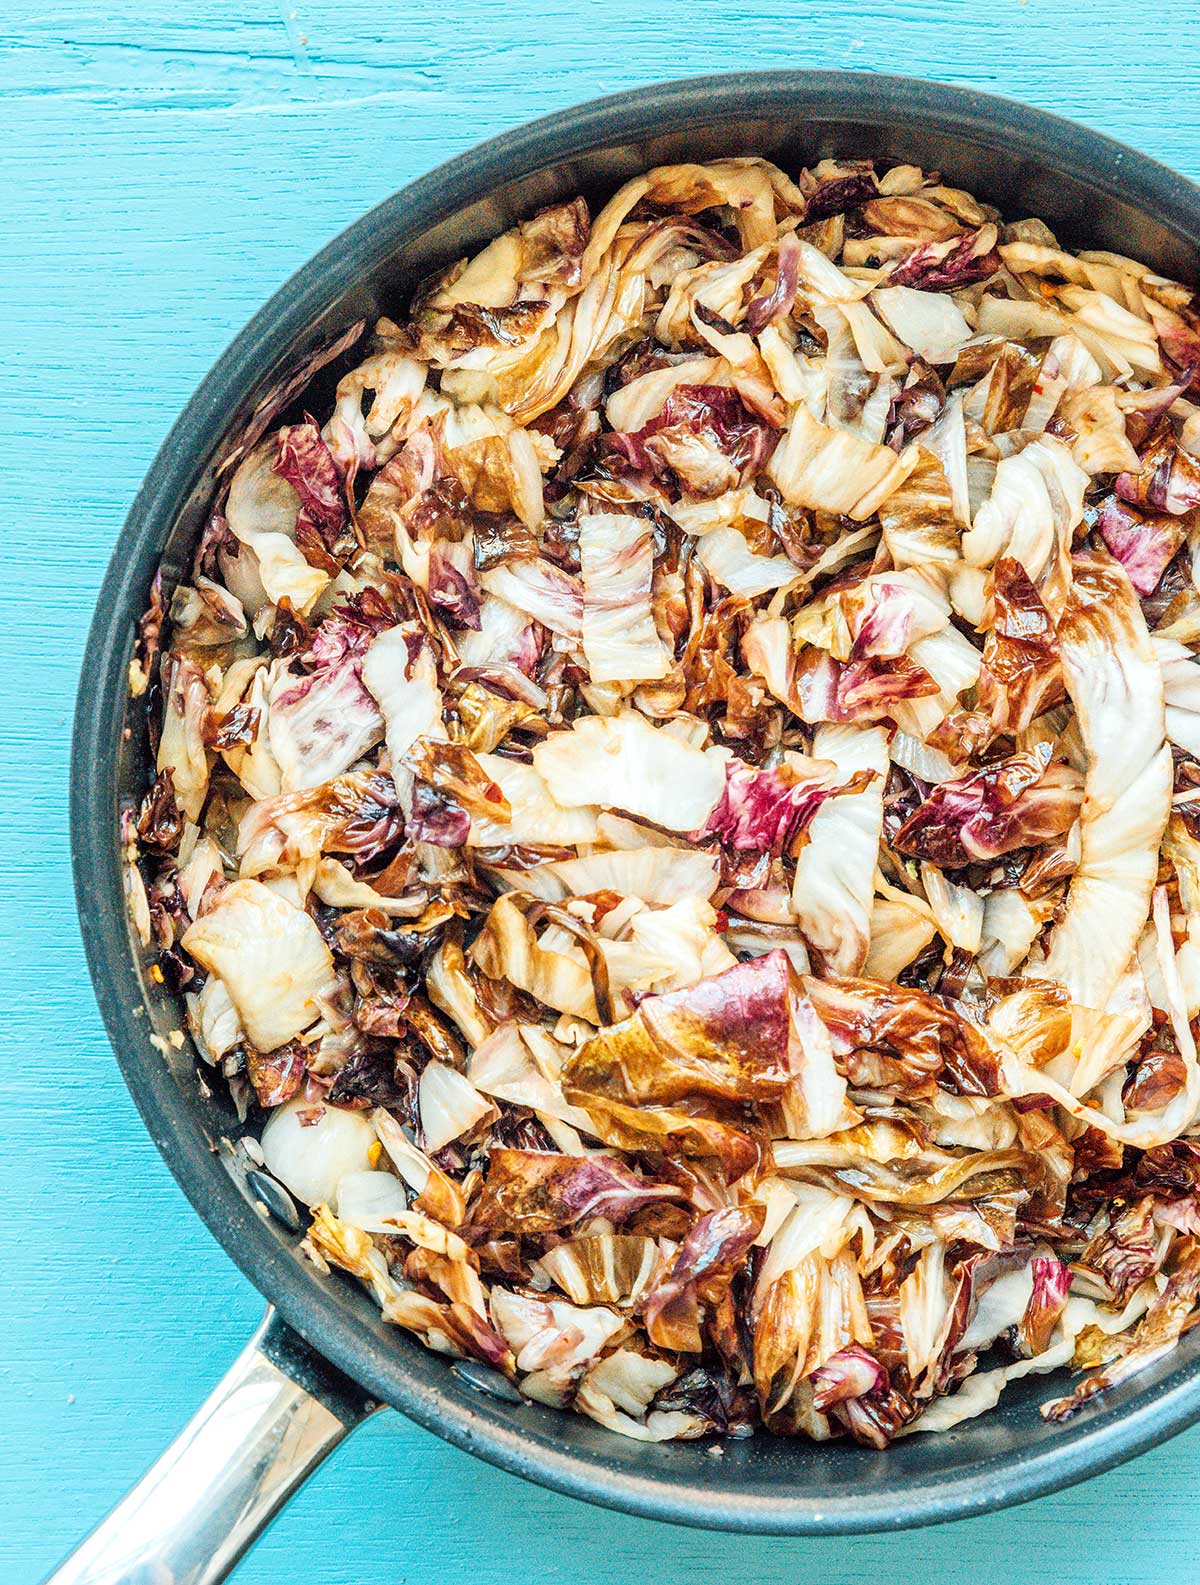 A skillet filled with cooked radicchio lettuce